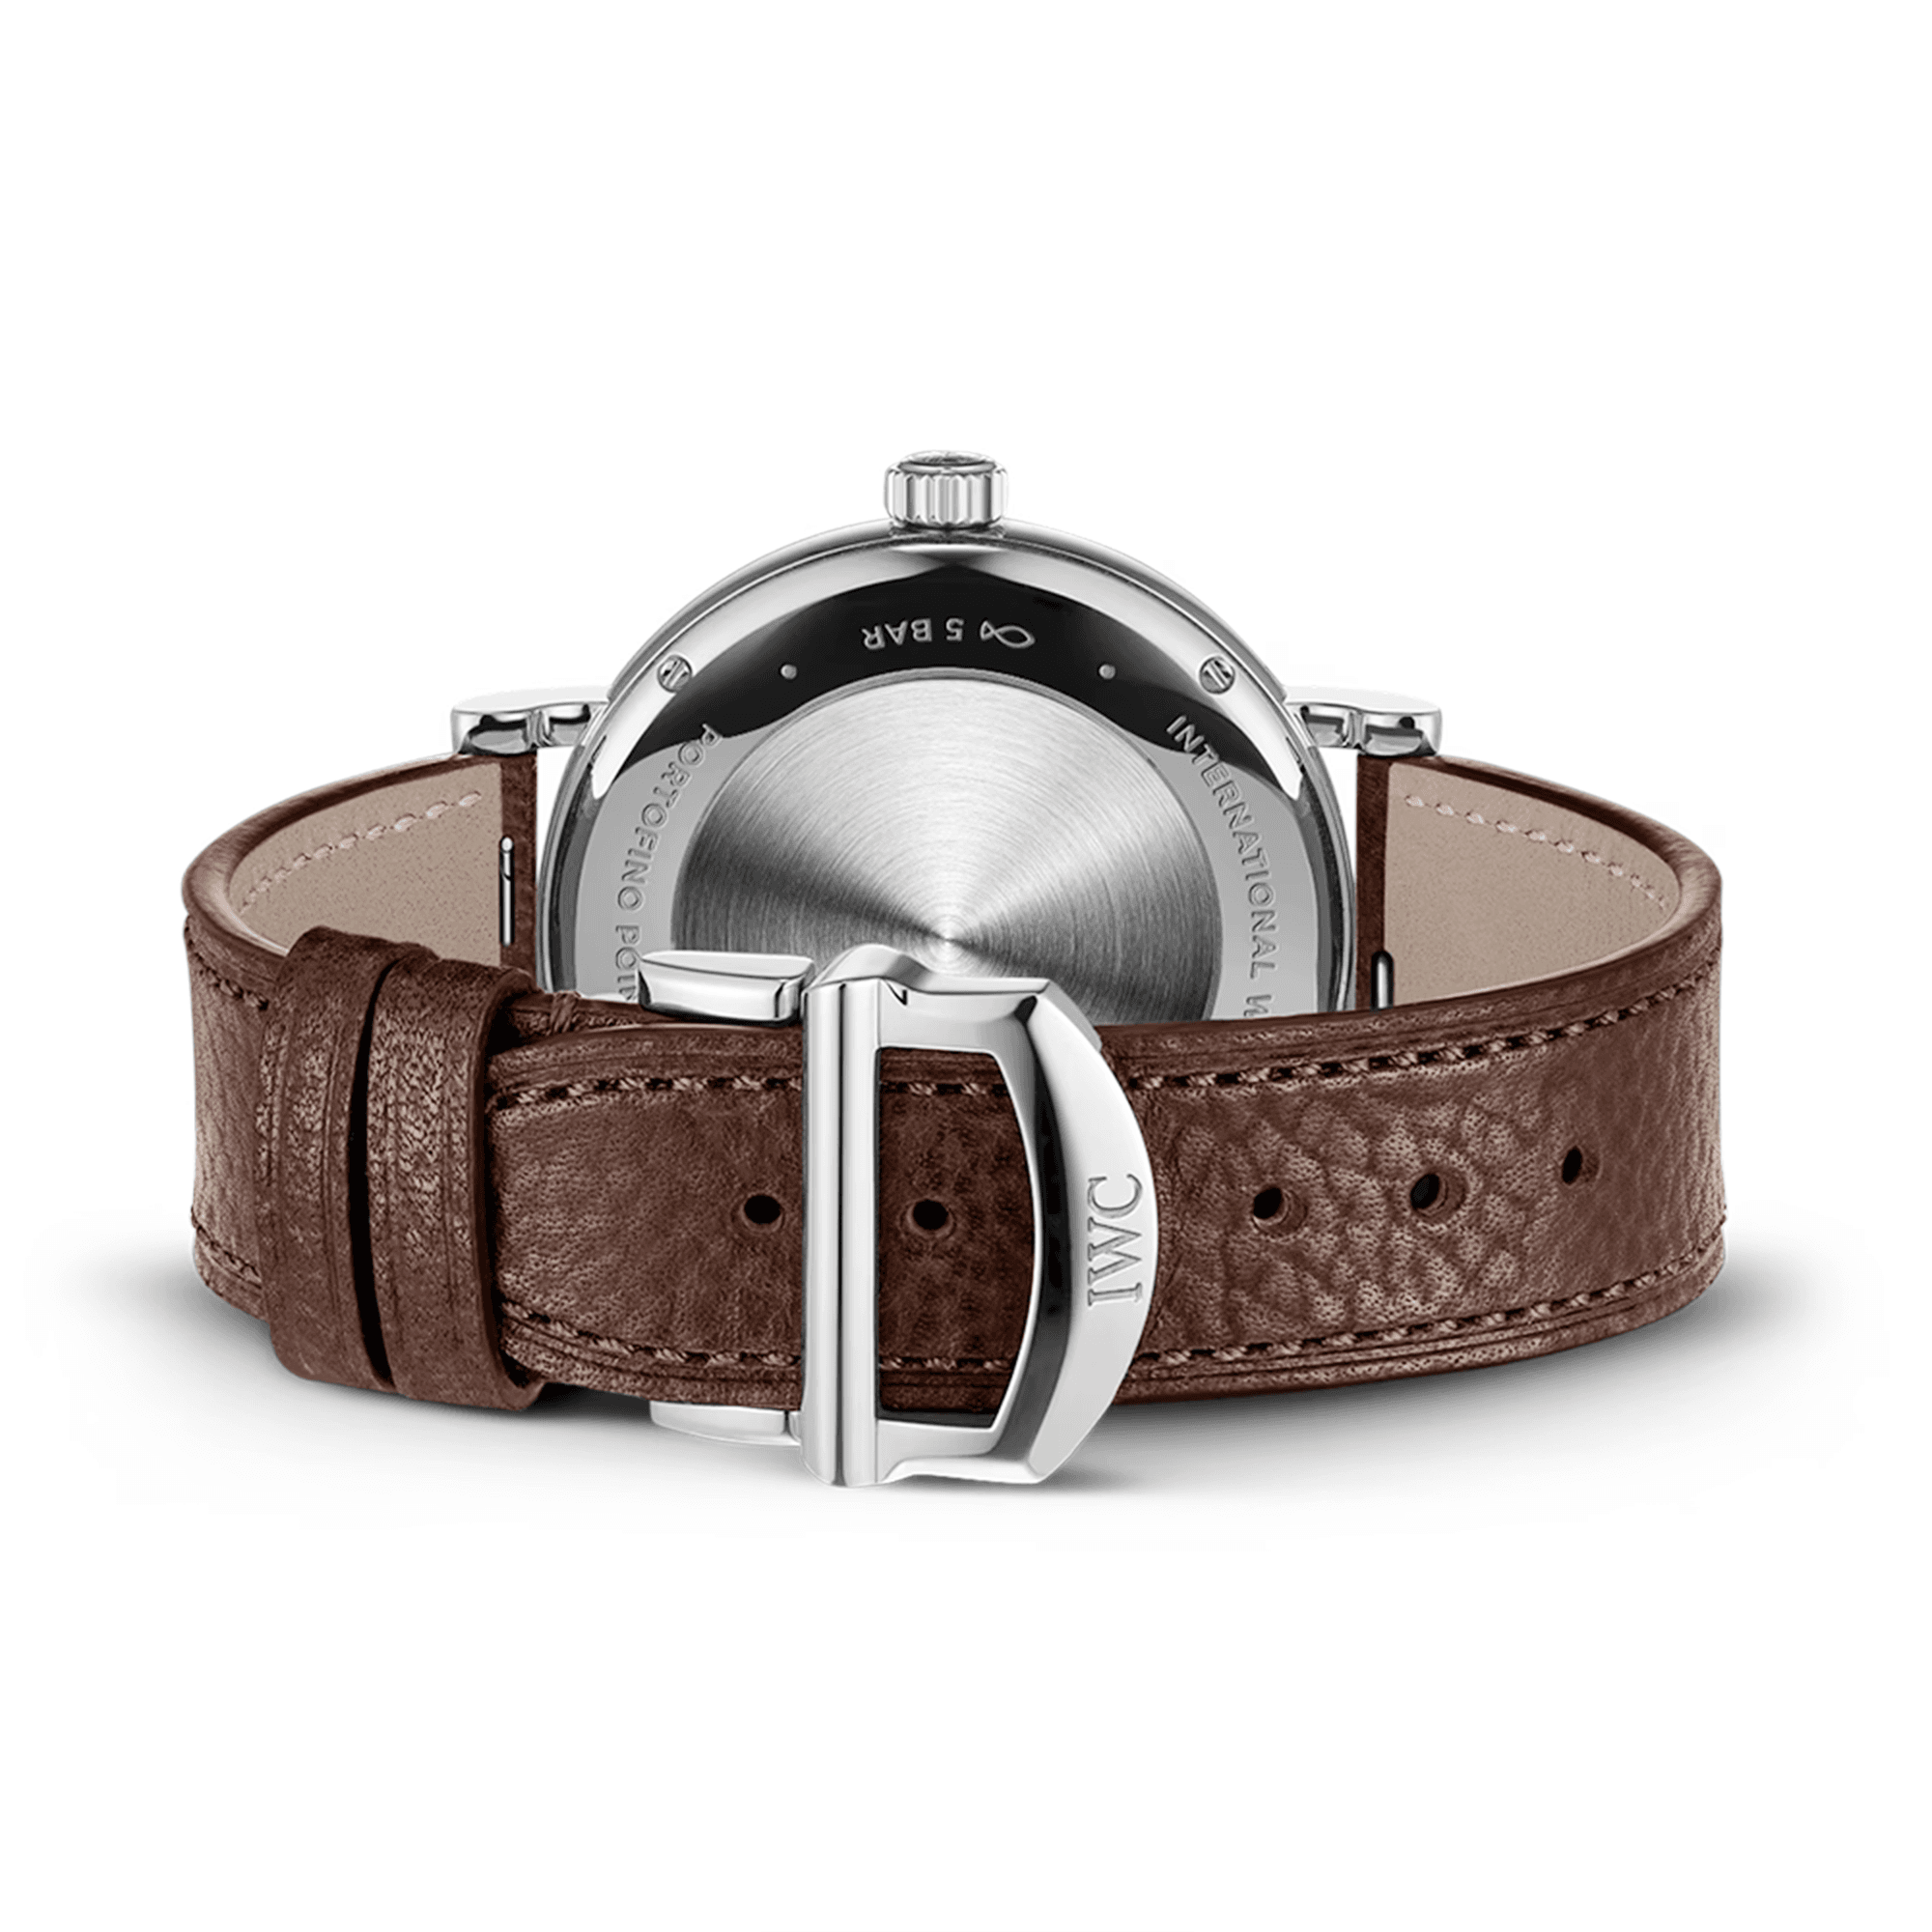 Portofino Pointer Date 39mm Silver/Rose Dial Leather Strap Watch